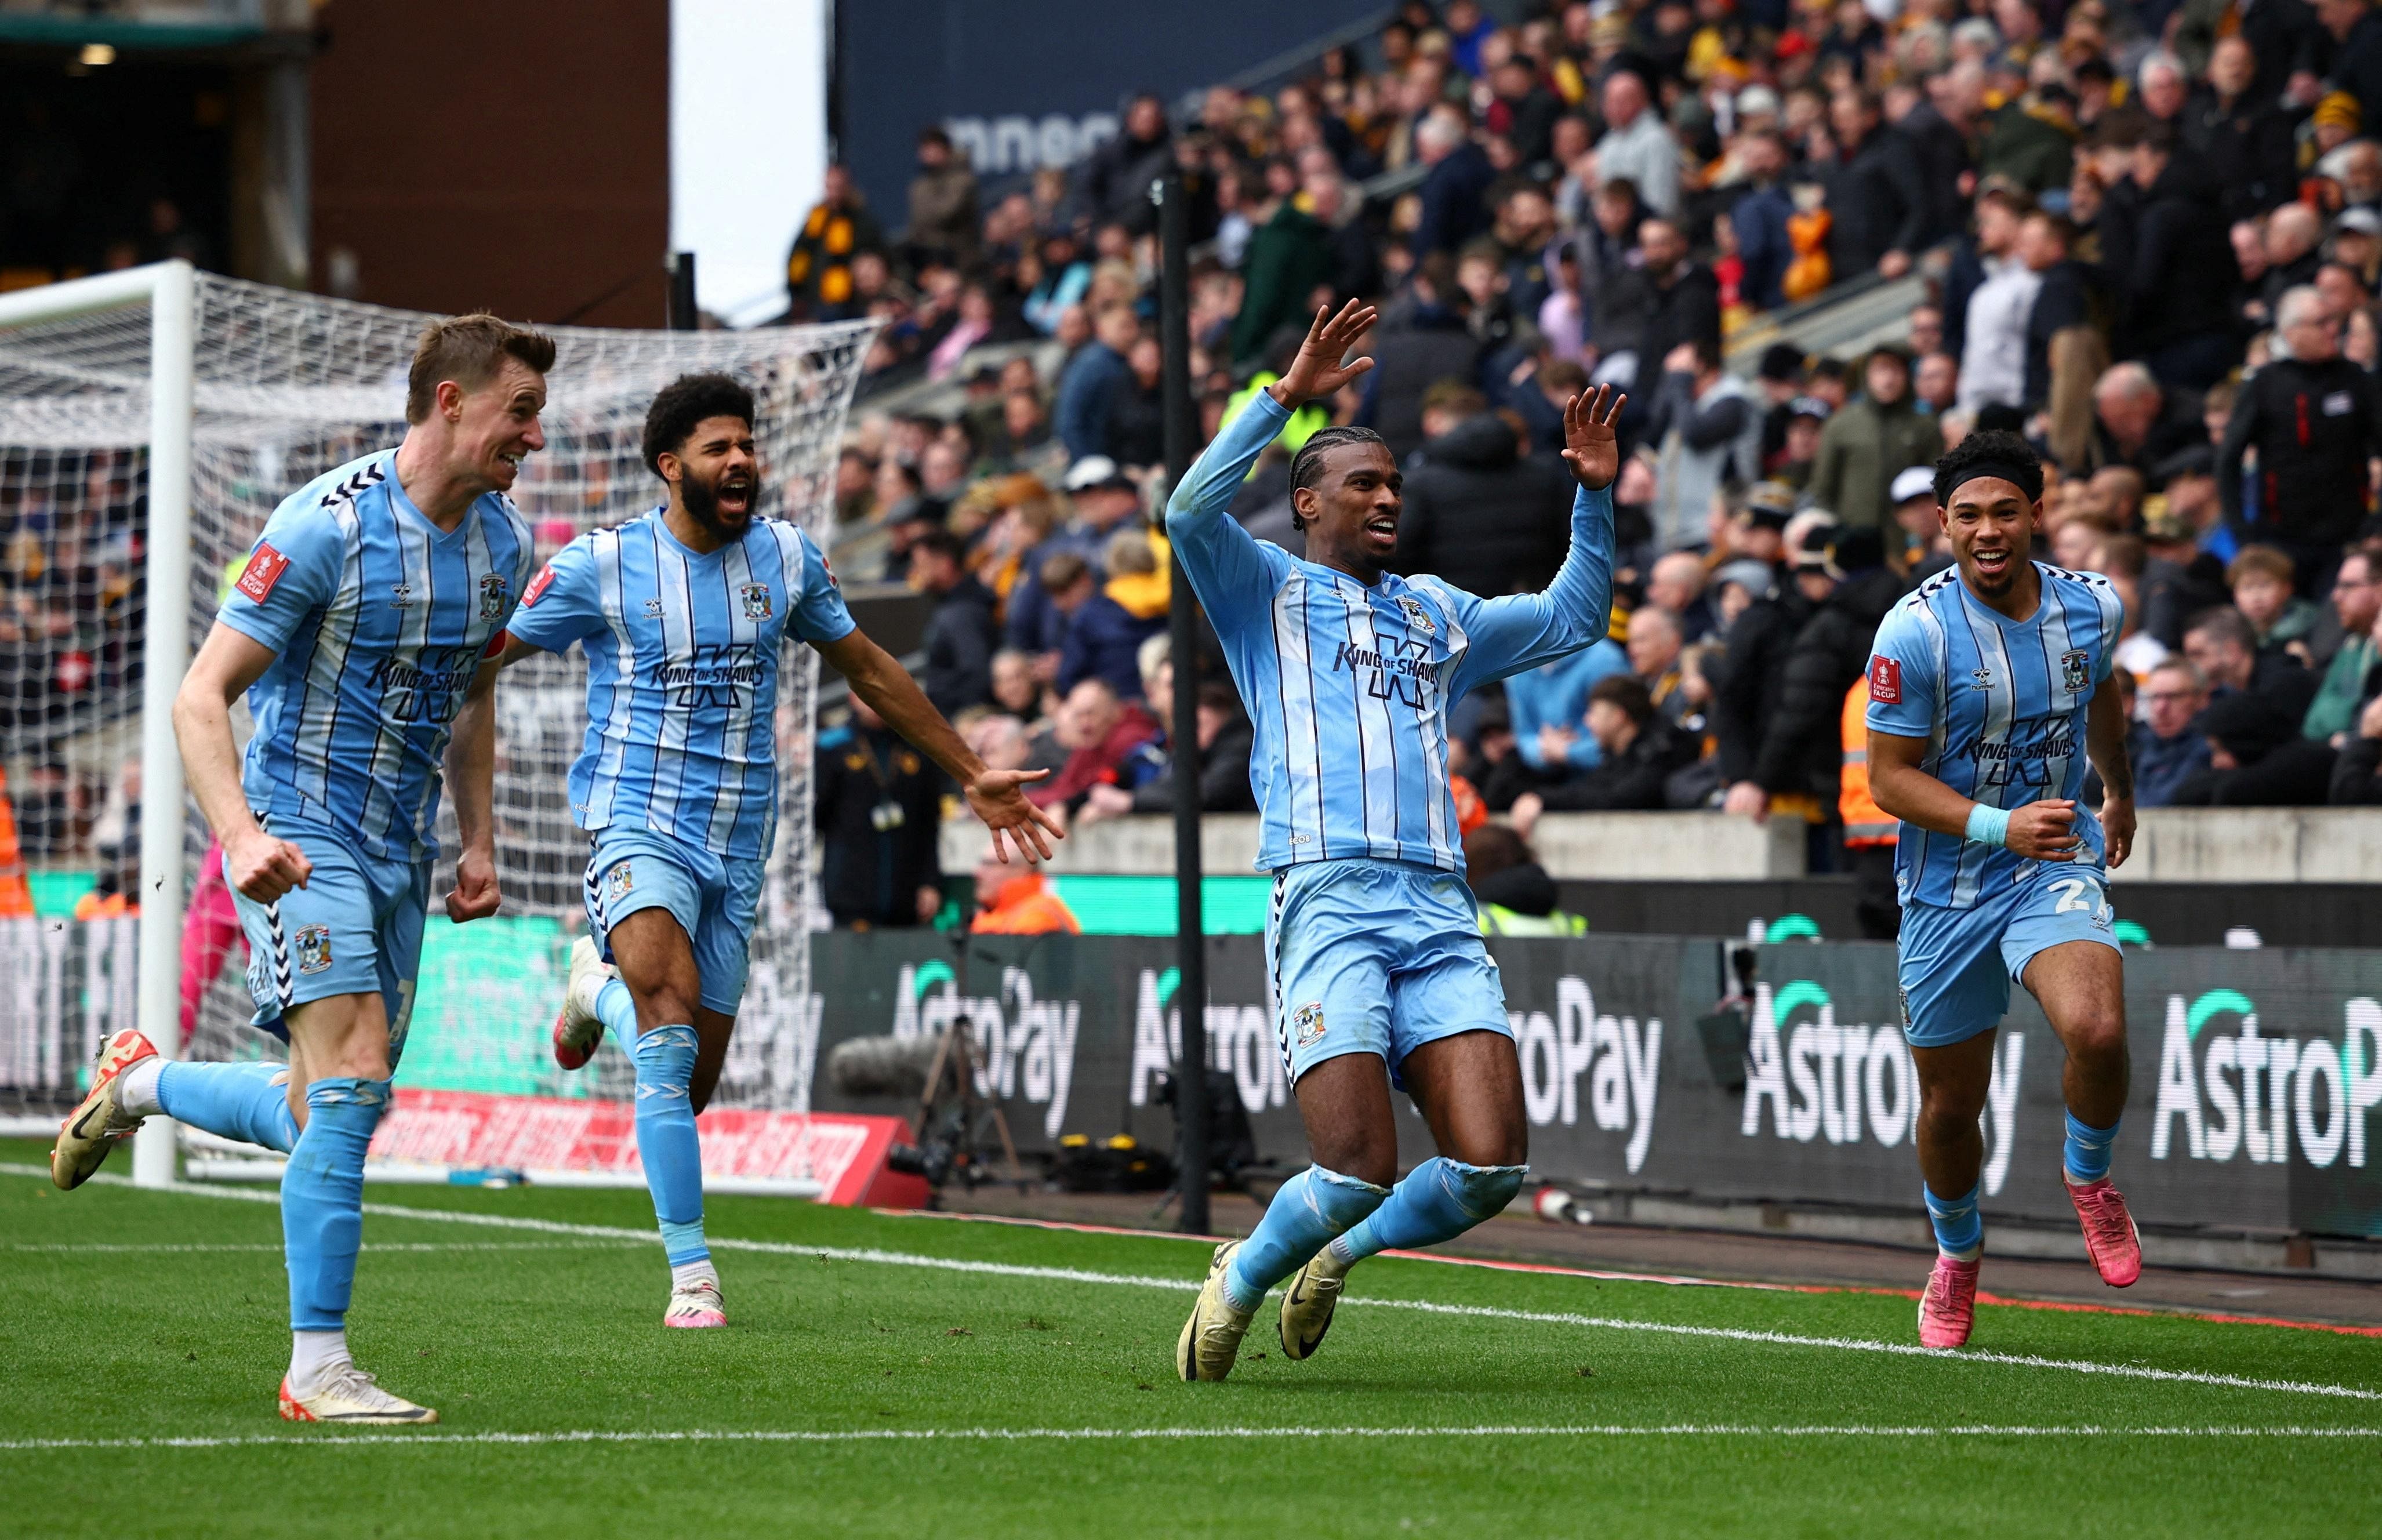 Coventry City stun Wolverhampton Wanderers to reach their first FA Cup semi-final since 1987